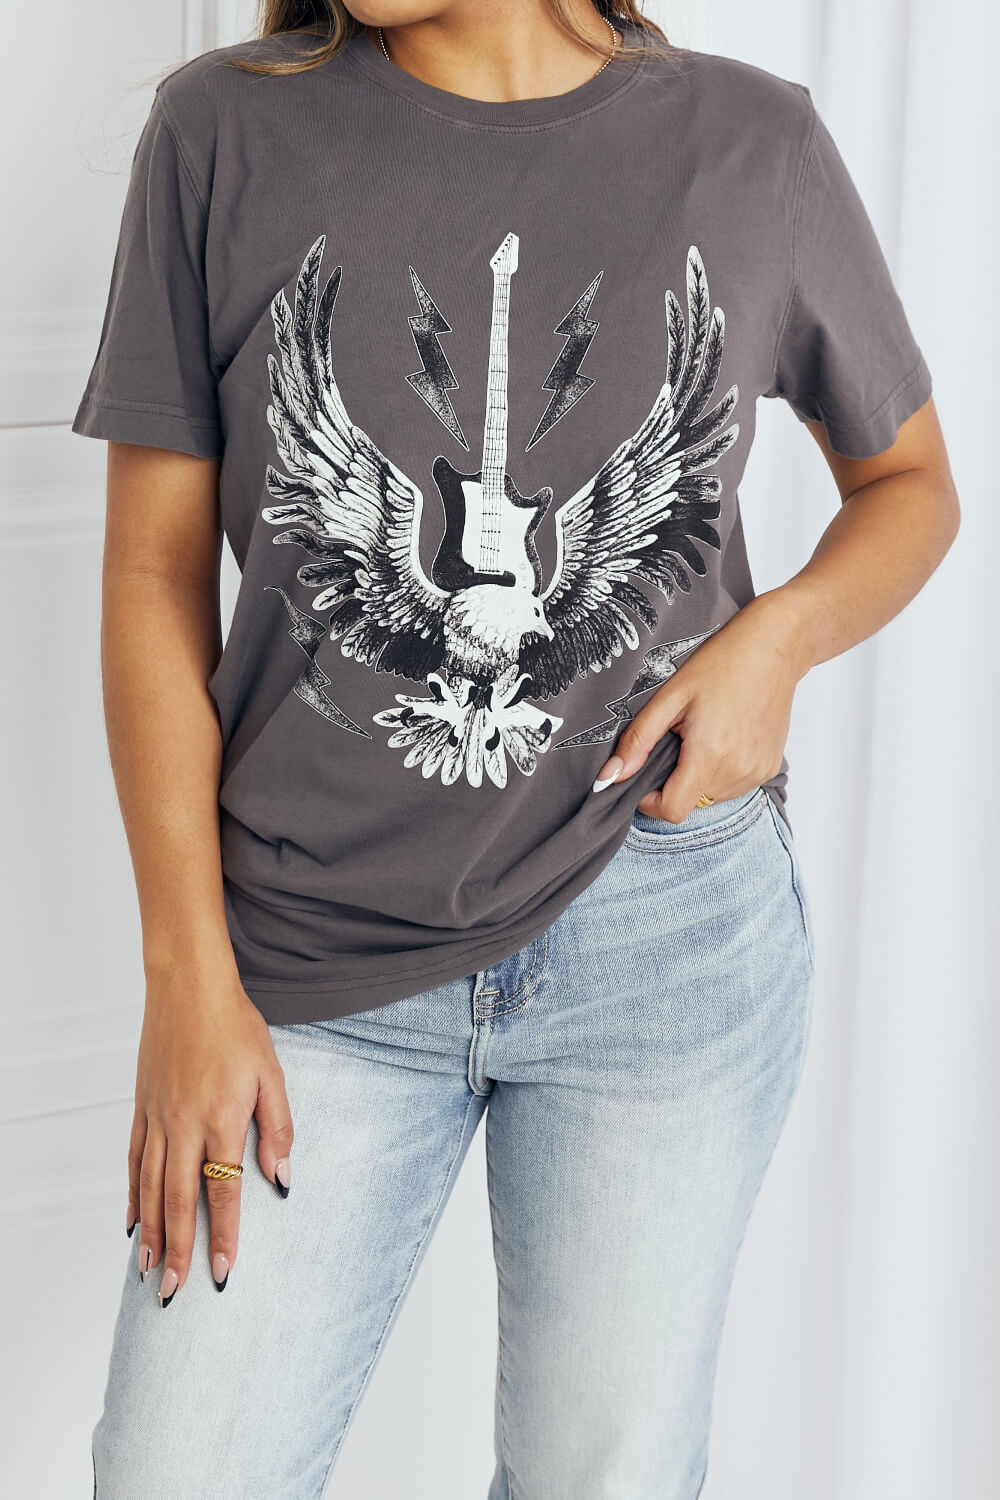 mineB Full Size Eagle Graphic Tee Shirt  | KIKI COUTURE-Women's Clothing, Designer Fashions, Shoes, Bags